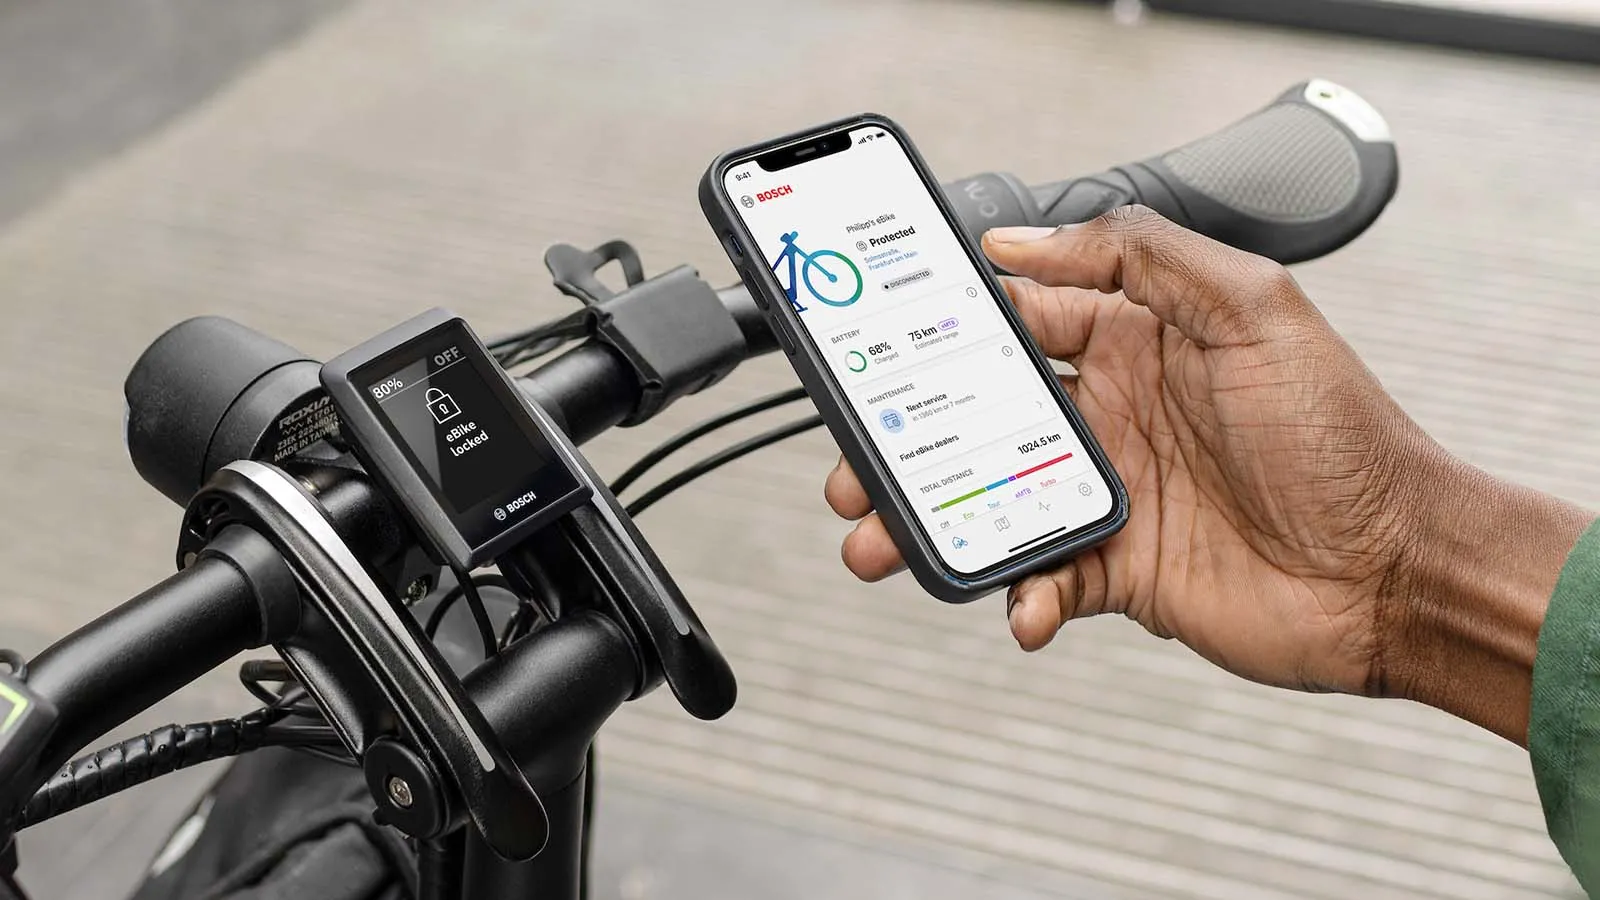 Bosch eBike Systems adds new navigation function to Kiox 300